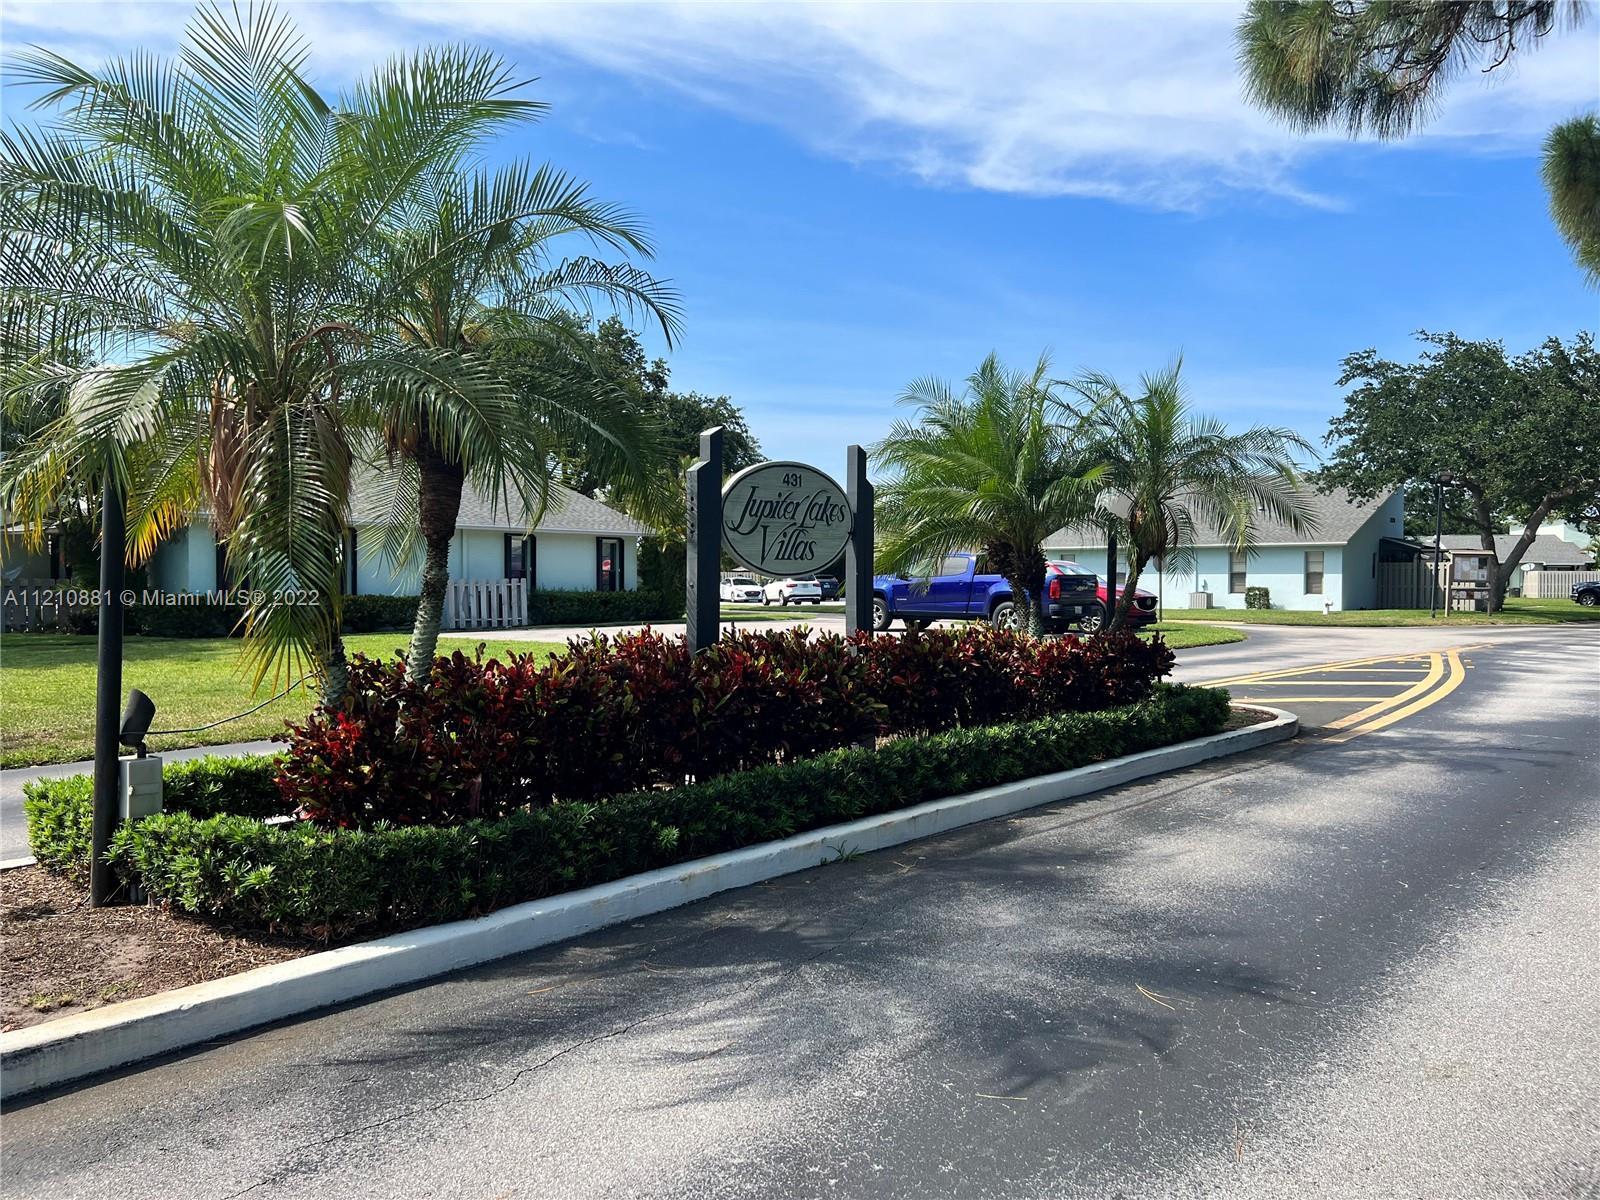 COMPLETELY RENOVATED MOVE-IN READY VILLA IN JUPITER LAKES VILLAS WITH BRAND NEW AC, NEW ROOF AND HIG